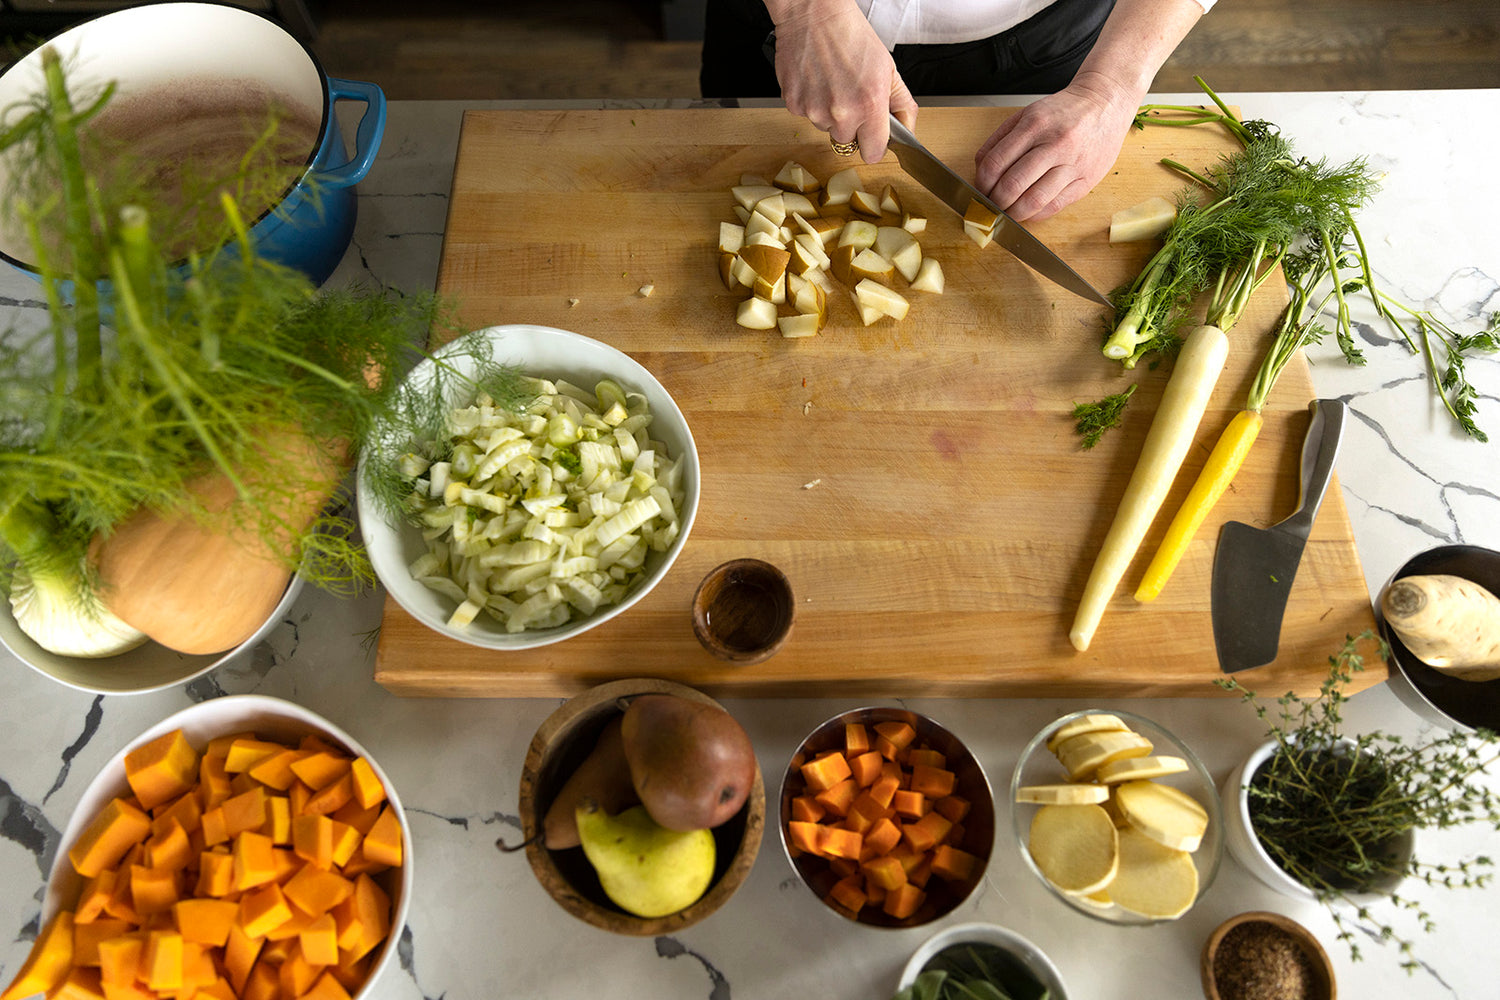 5 Easy Ways To Reduce Food Waste